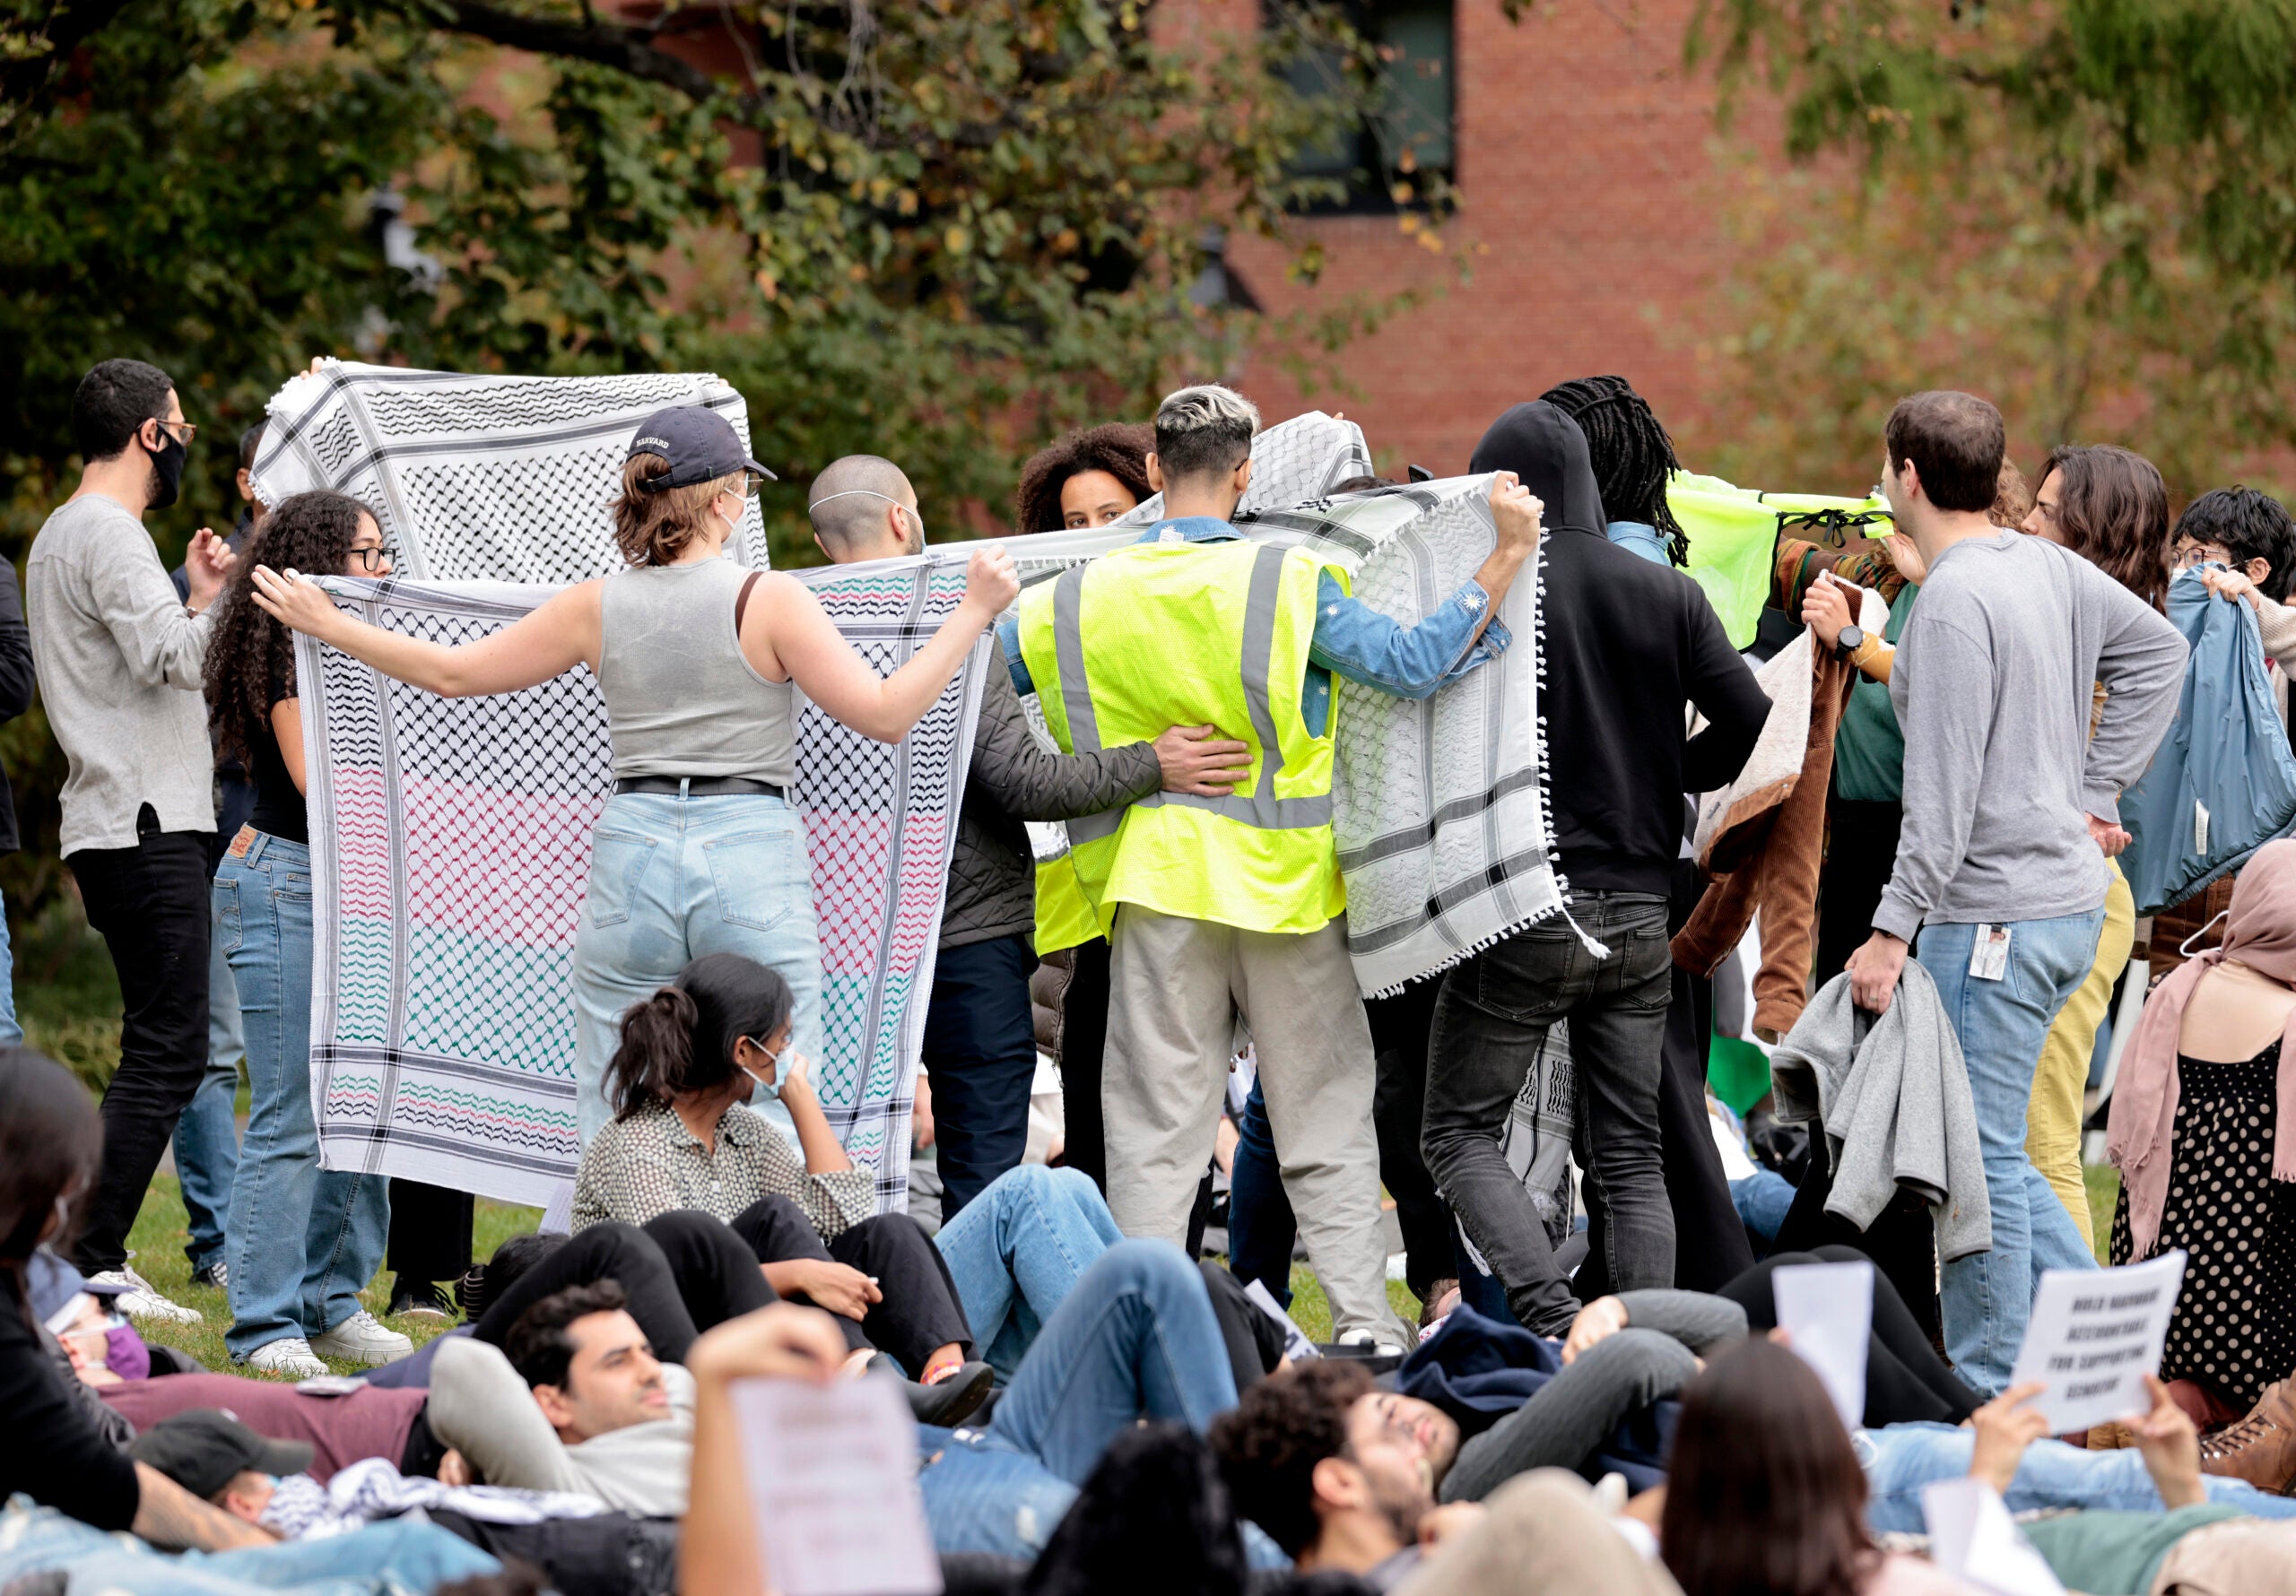 Video shows altercation at pro-Palestine 'die-in' at Harvard